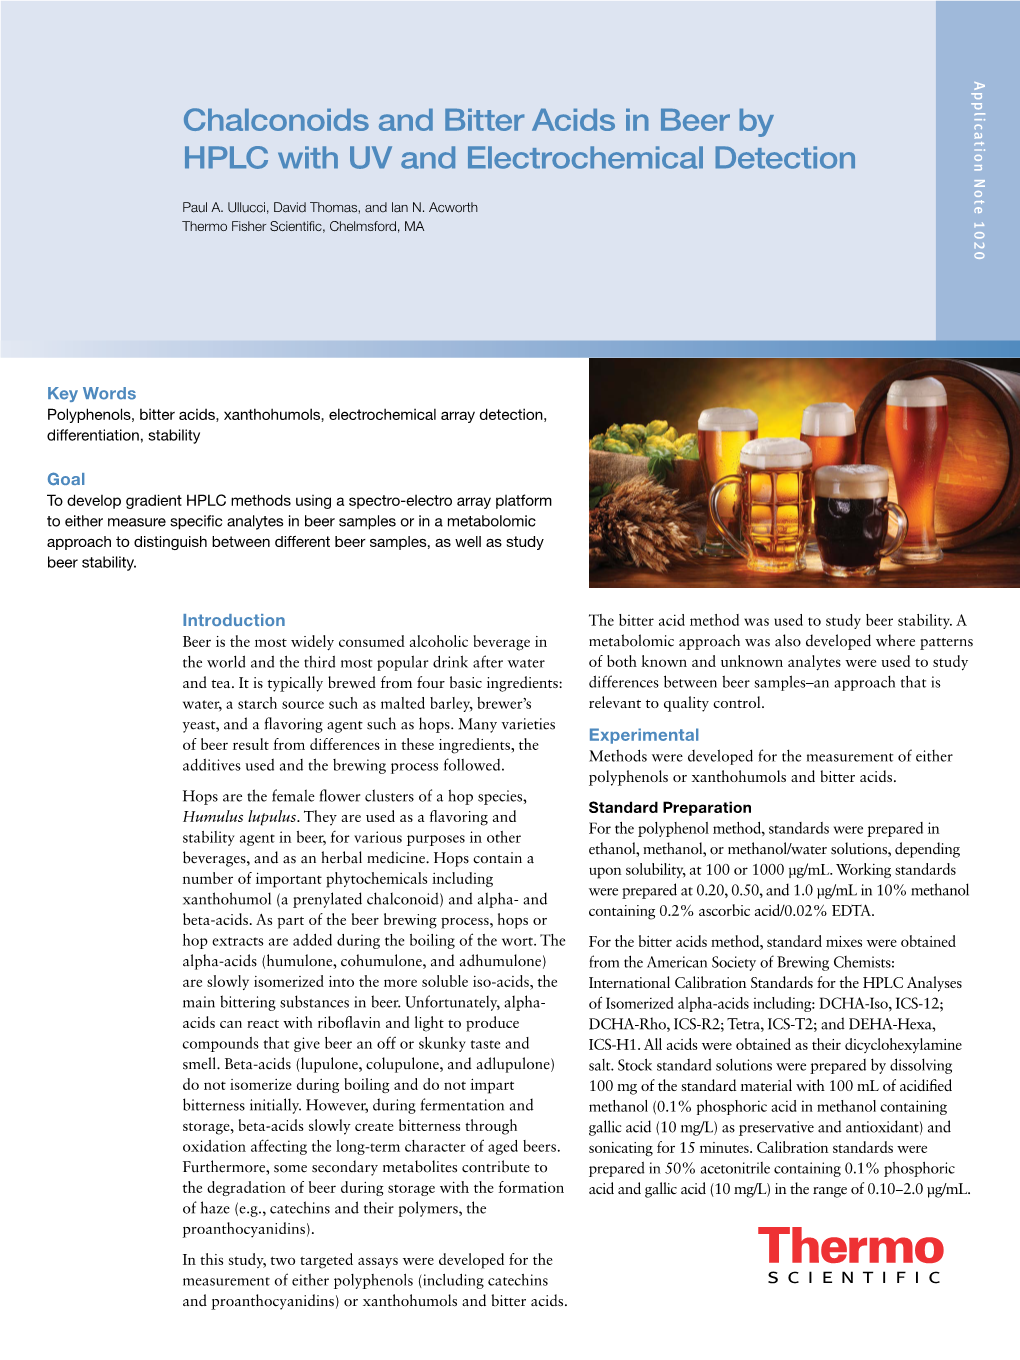 Chalconoids and Bitter Acids in Beer by HPLC with UV and Electrochemical Detection